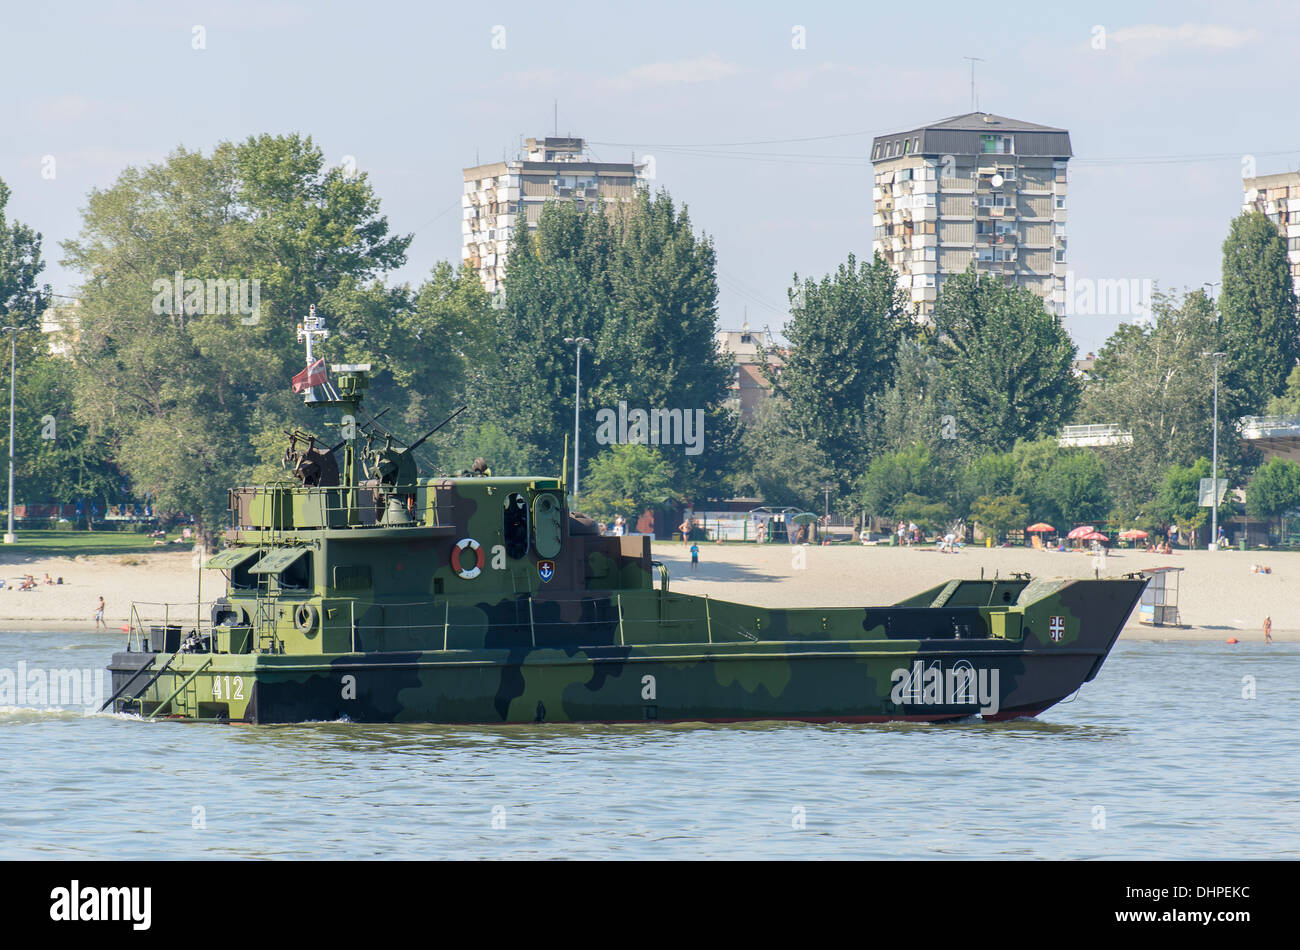 441-class assault ship of the Serbian Armed Forces River Flotilla on the river Danube in Novi Sad, Serbia at September 6, 2013 Stock Photo